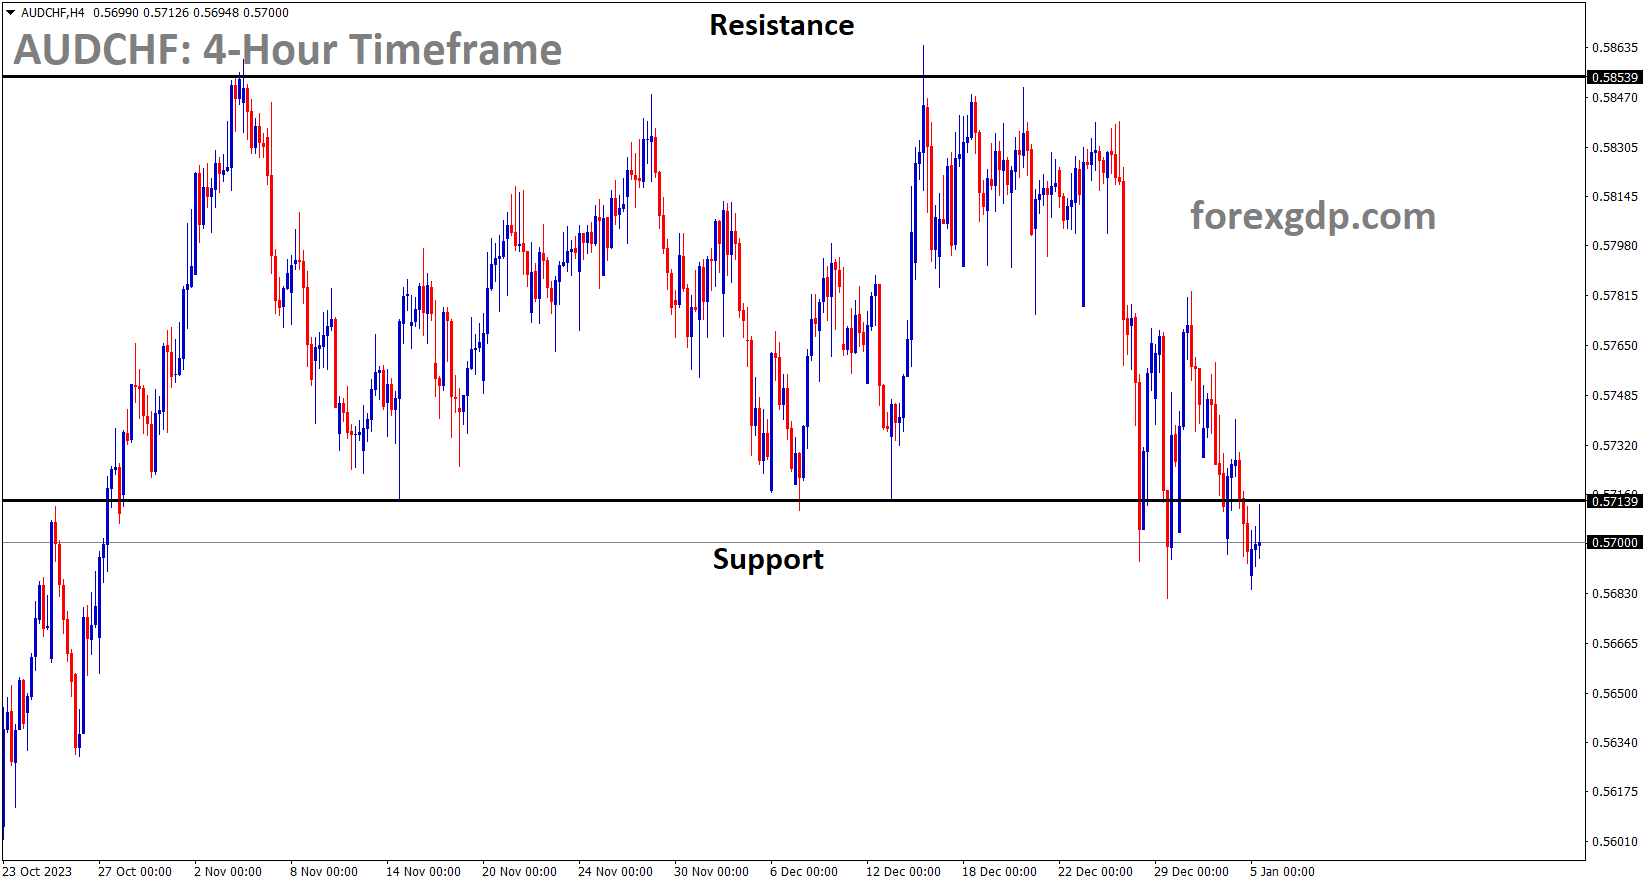 AUDCHF is moving in the Box pattern and the market has reached the support area of the pattern